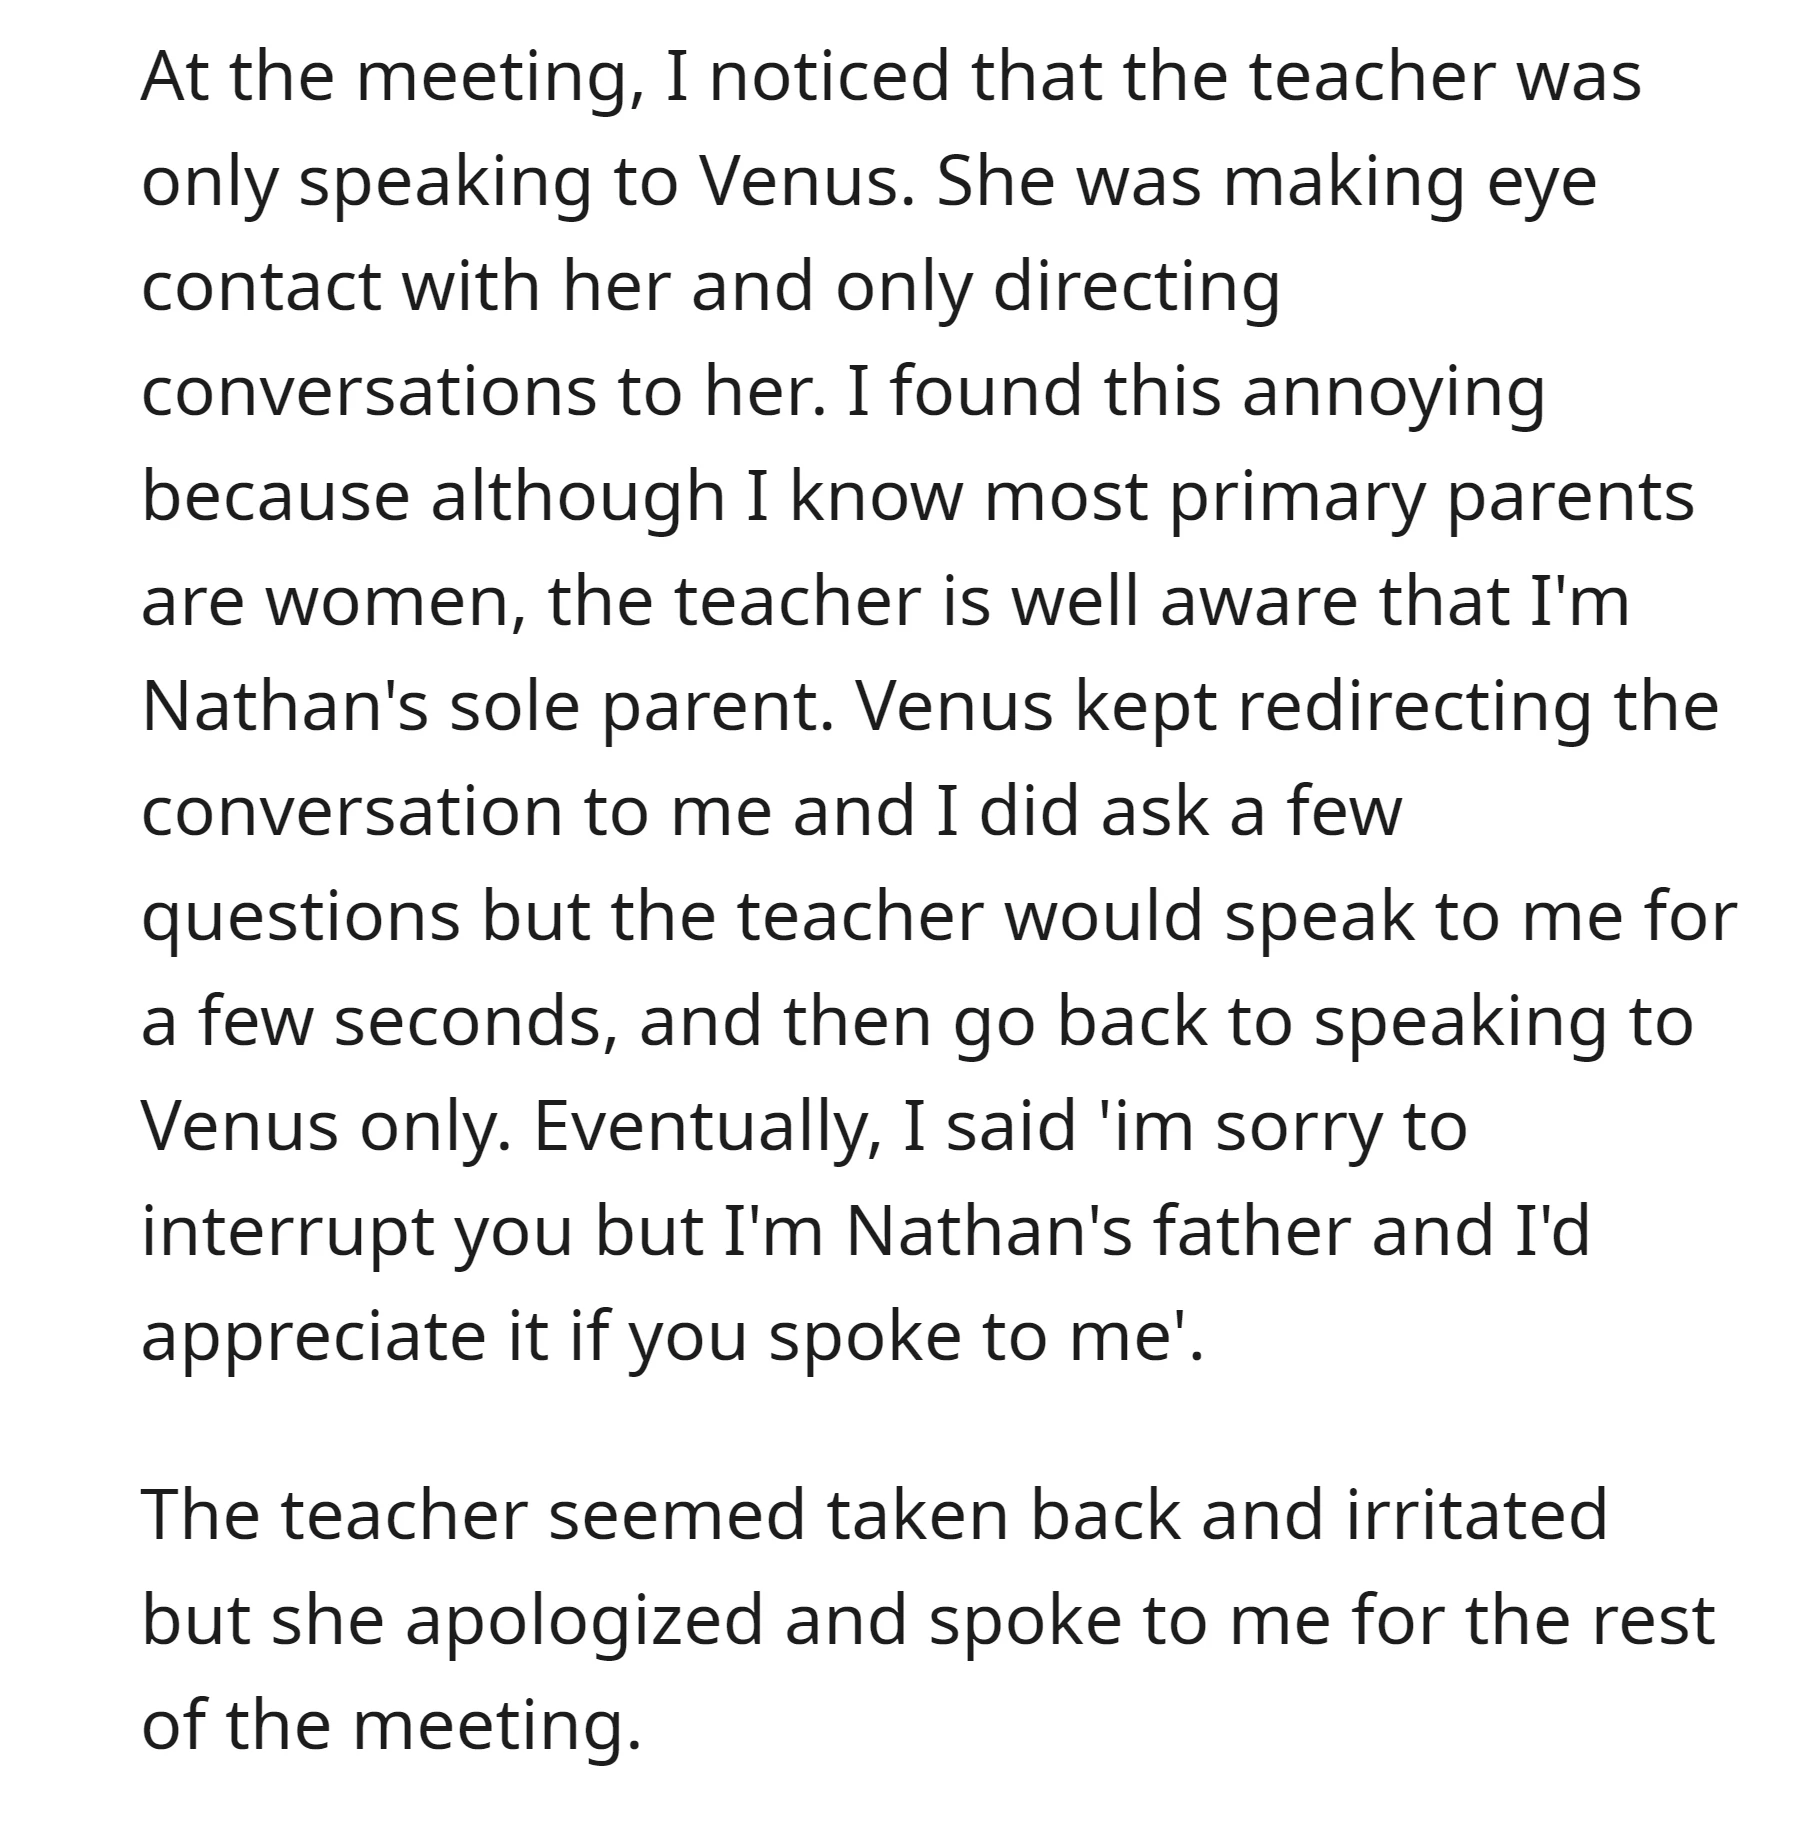 During the parent-teacher meeting, the teacher consistently spoke only to the OP's girlfriend